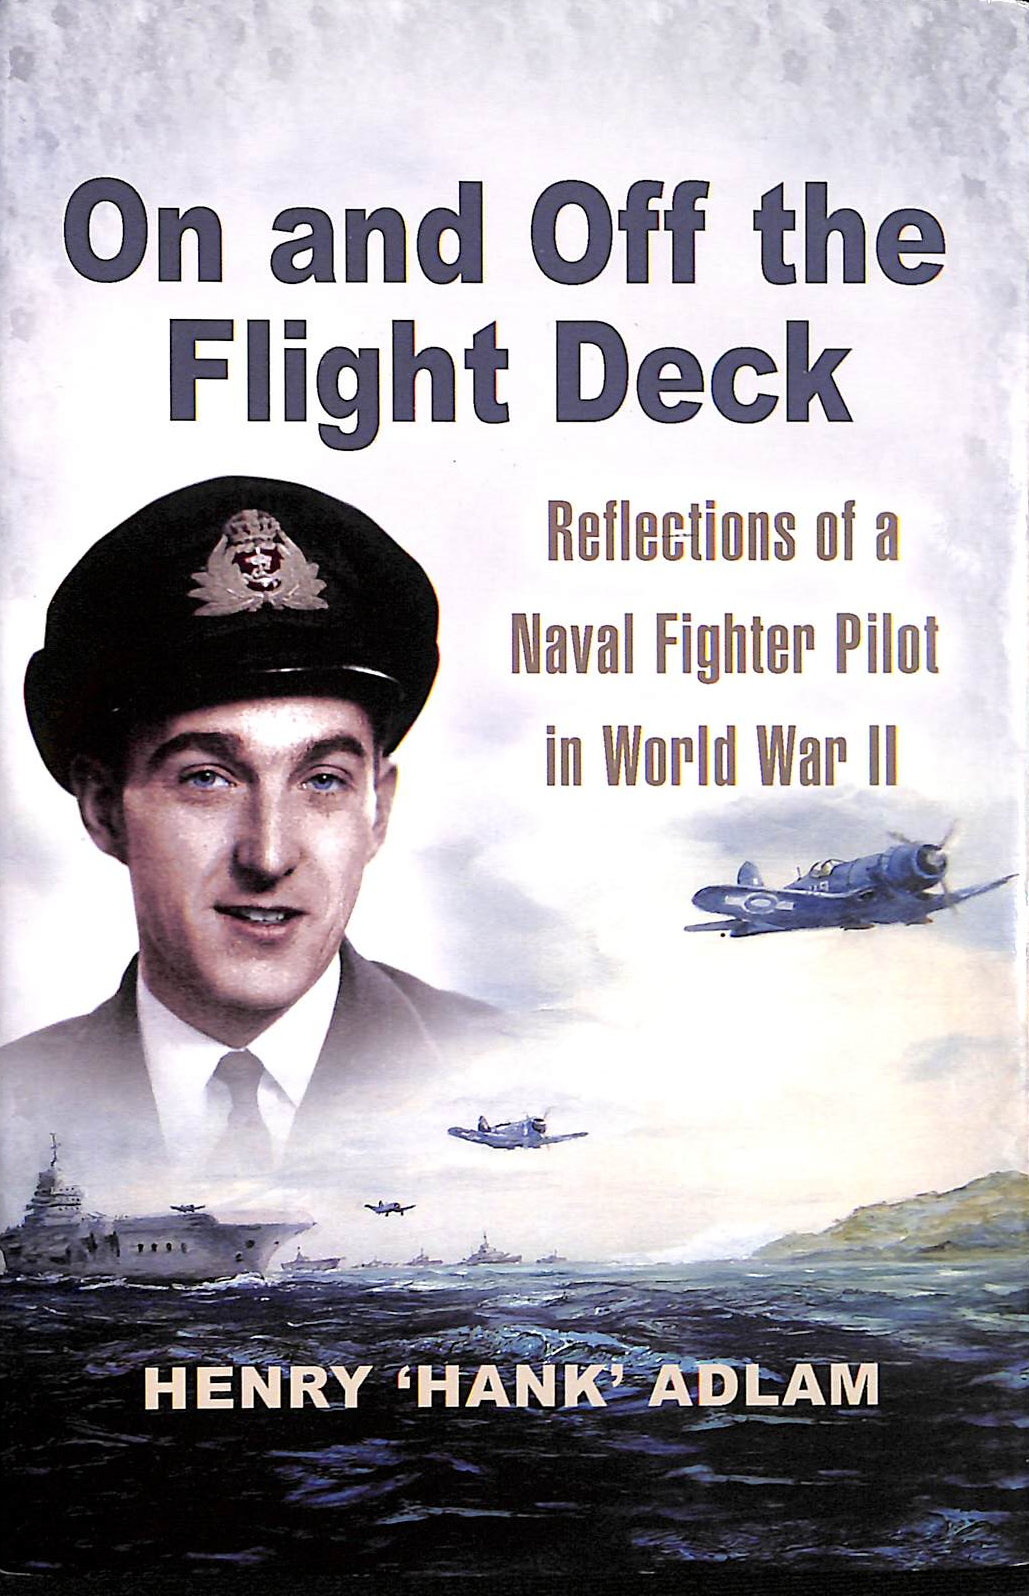 ADLAM, HENRY 'HANK' - On and Off the Flight Deck: Reflections of a Naval Fighter Pilot in Wwii